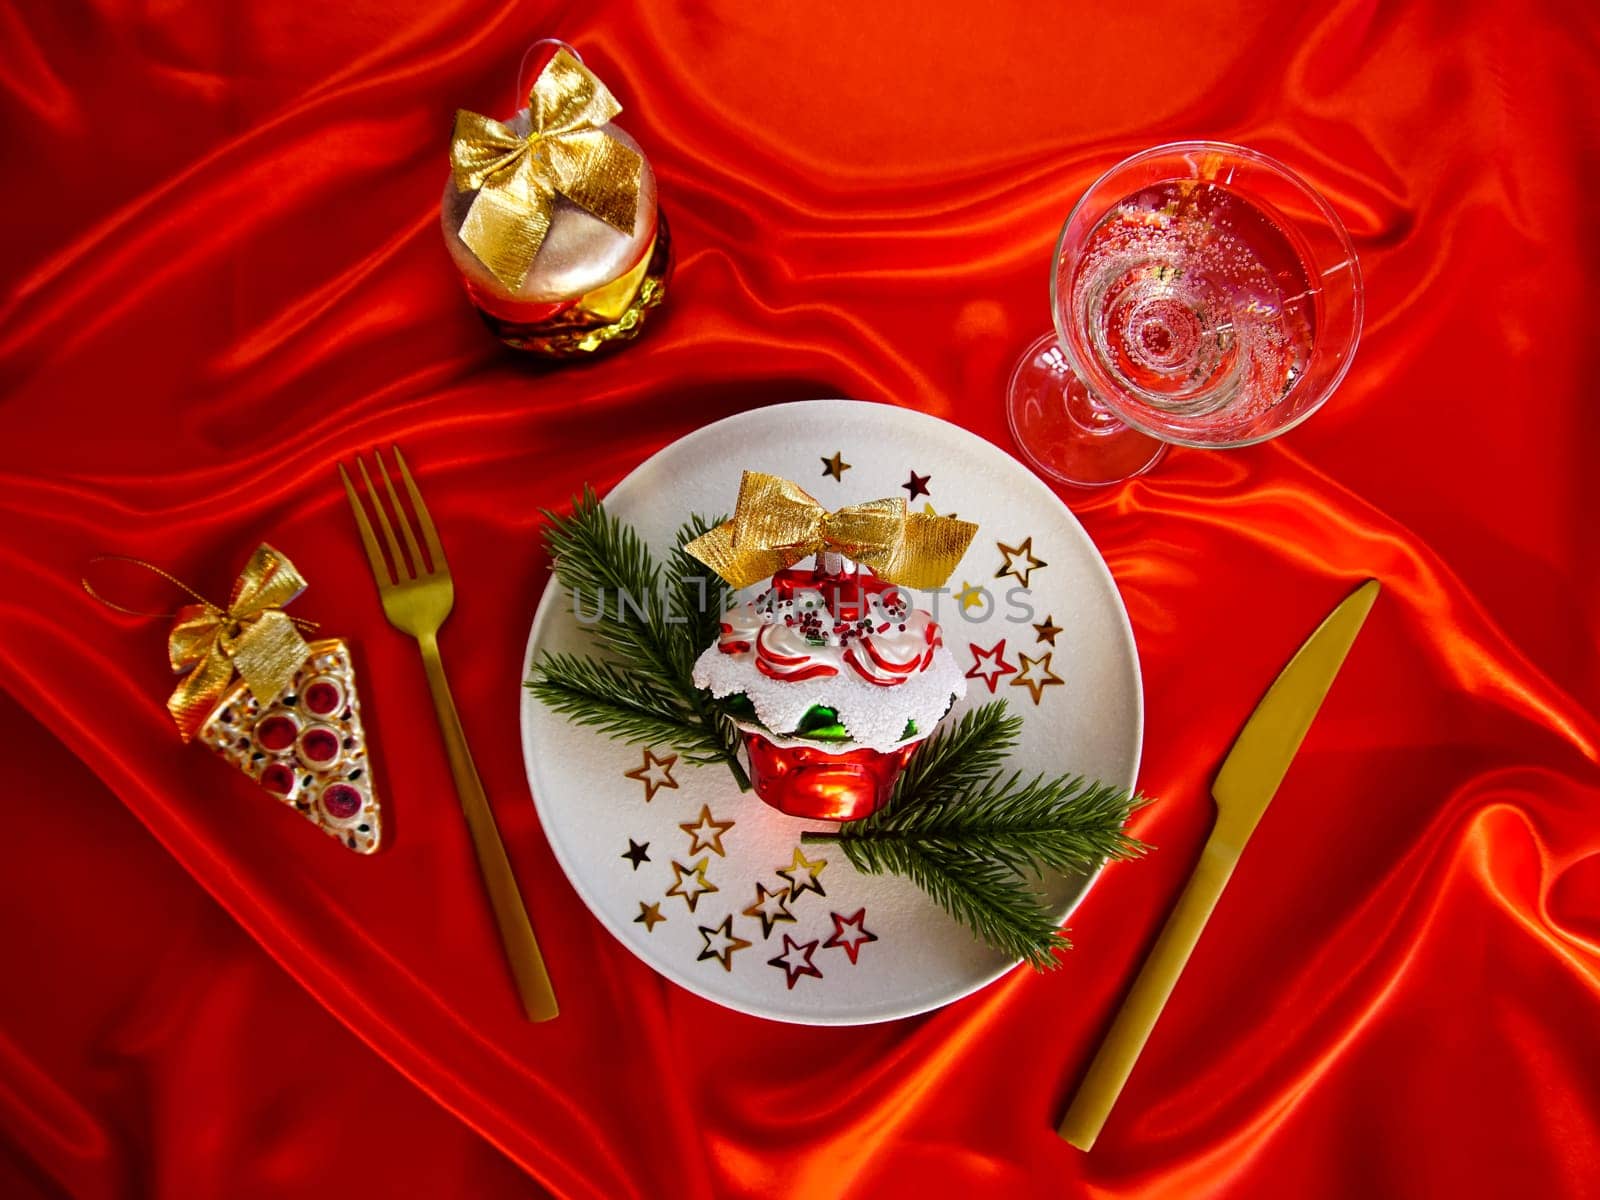 New Year's desserts. Creative table setting with Christmas tree toys. Plates with Christmas toys are placed on a red satin tablecloth.